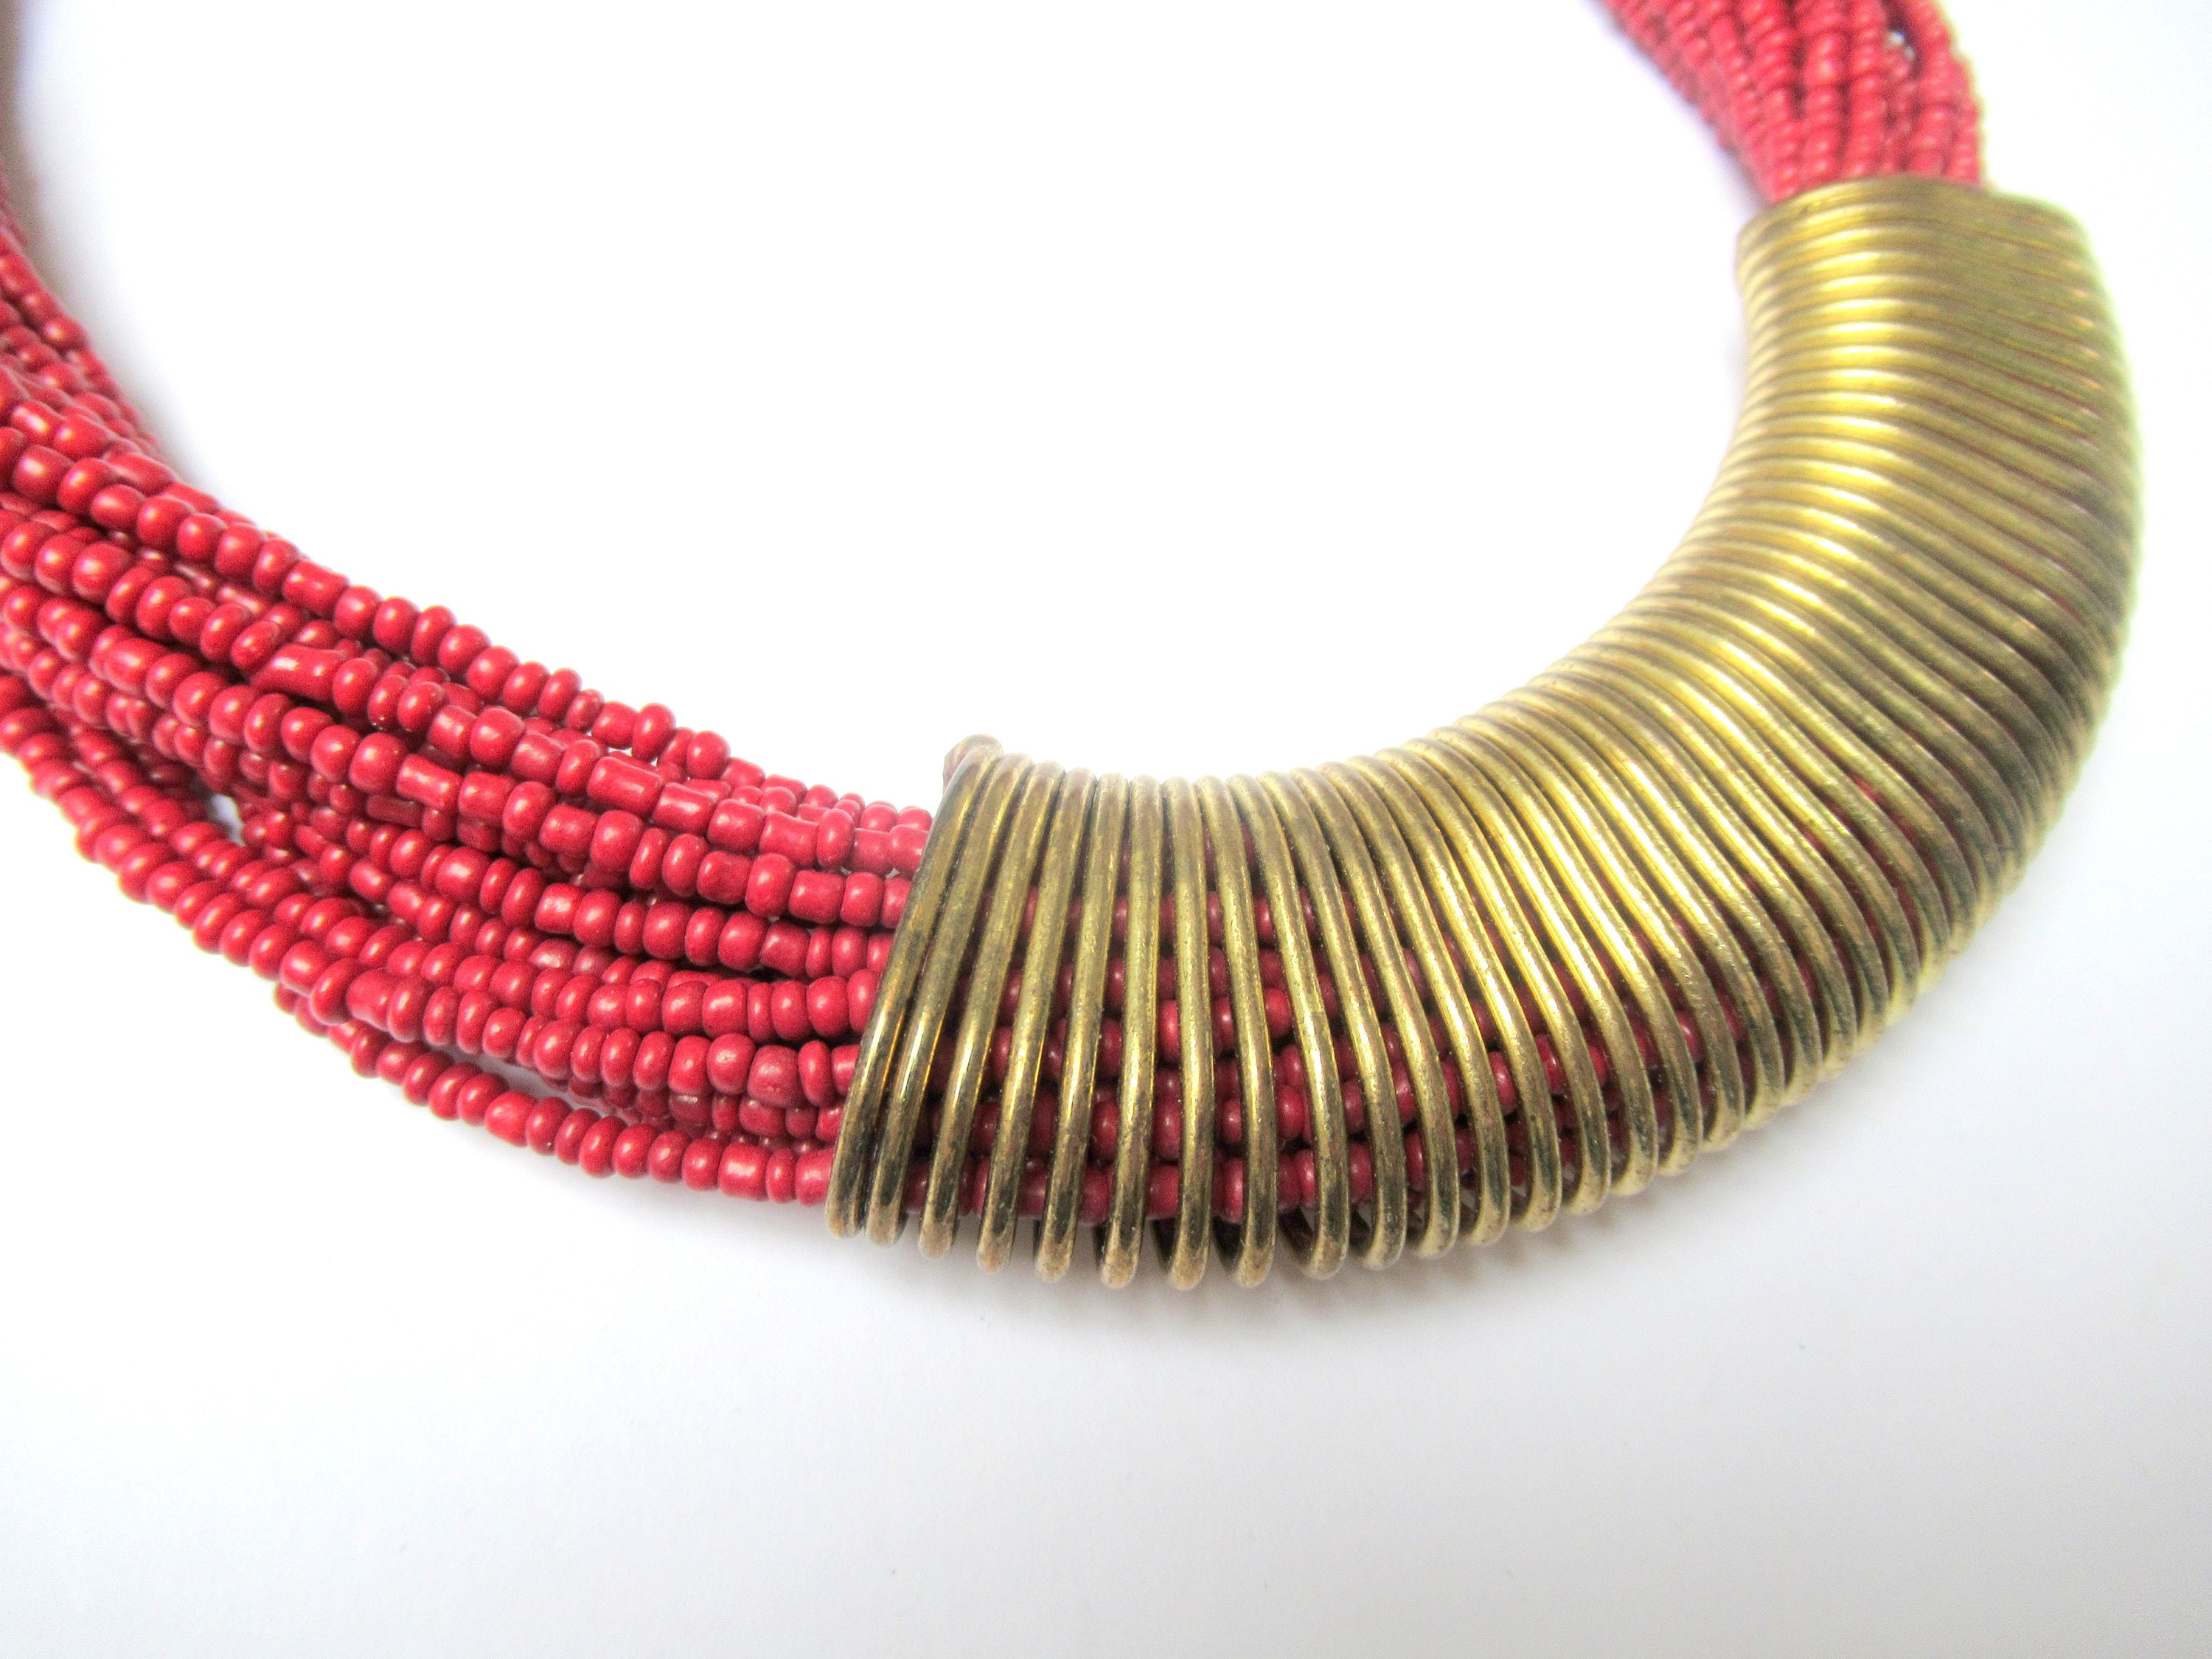 Crimson Red & Gold Tribal Necklace Multi Row Ethnic Boho African Style Hoop Effect Collar